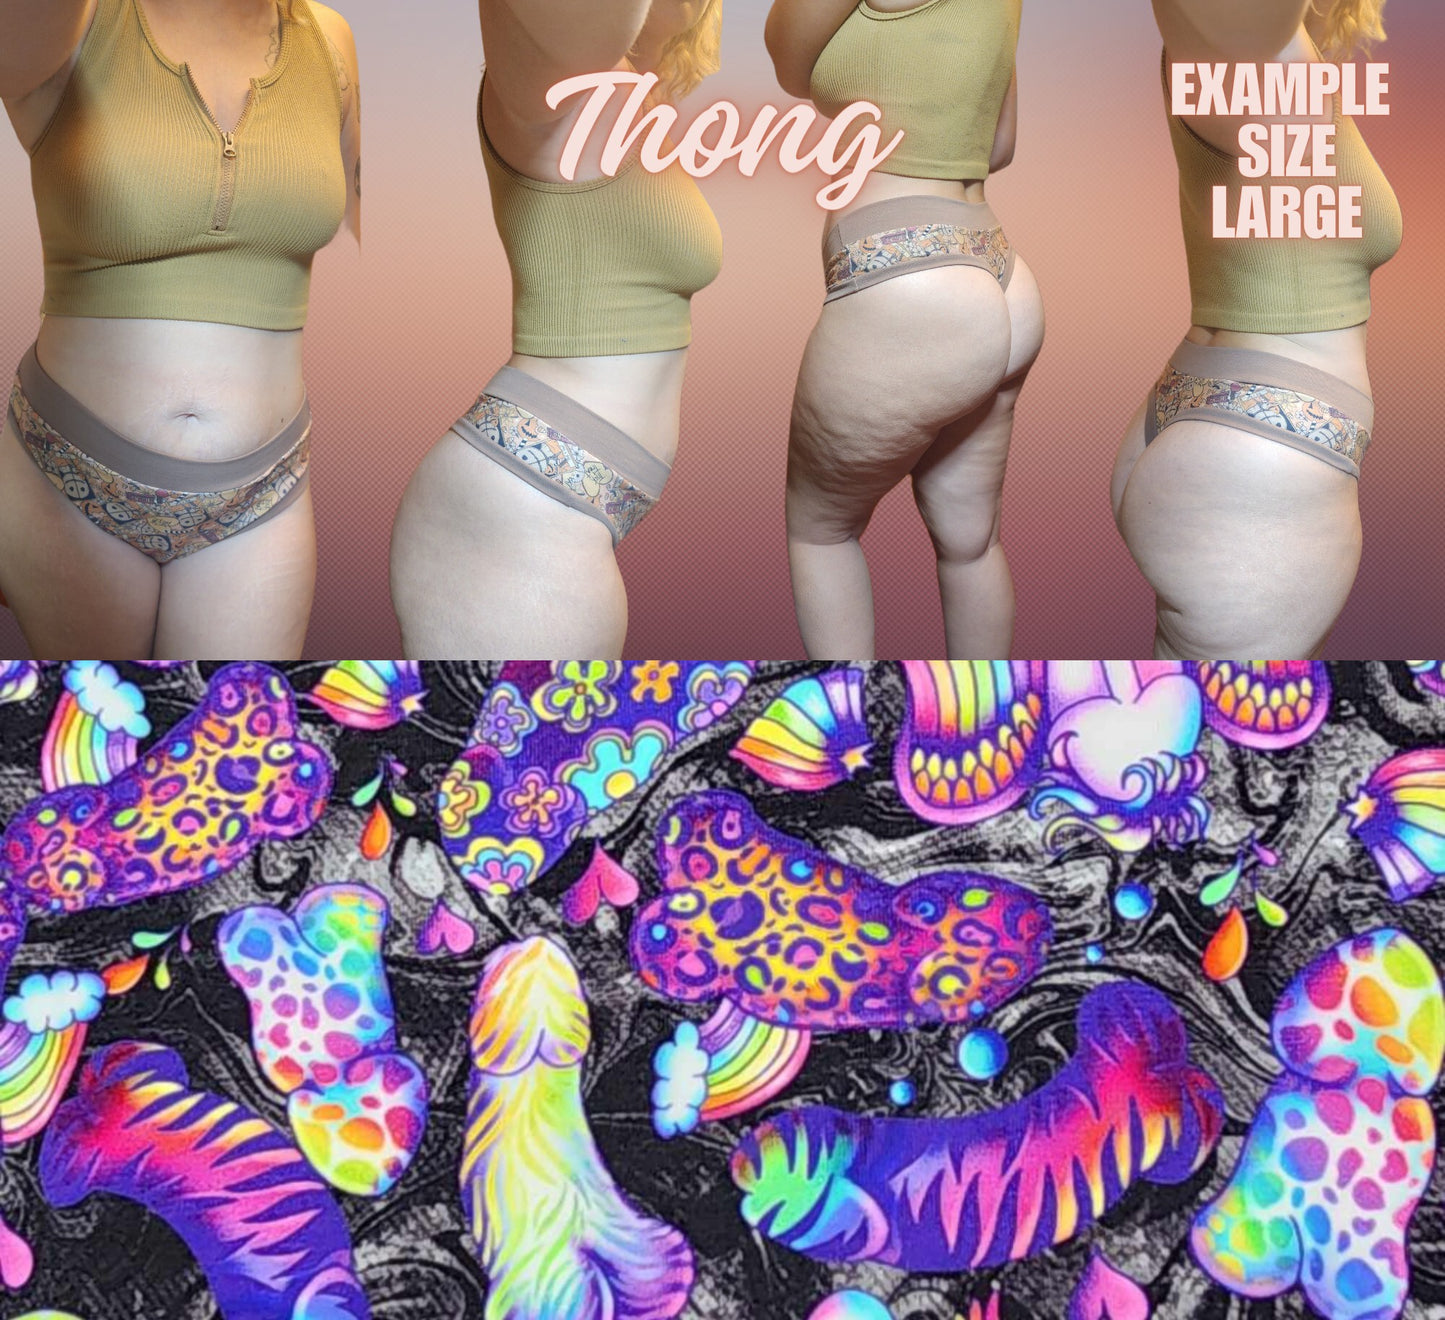 Turtle, Rainbow, Kraken, Bees, LF Dong x6 Prints | Thondlewear, Thongs for every body | Elastic/Knit Bands